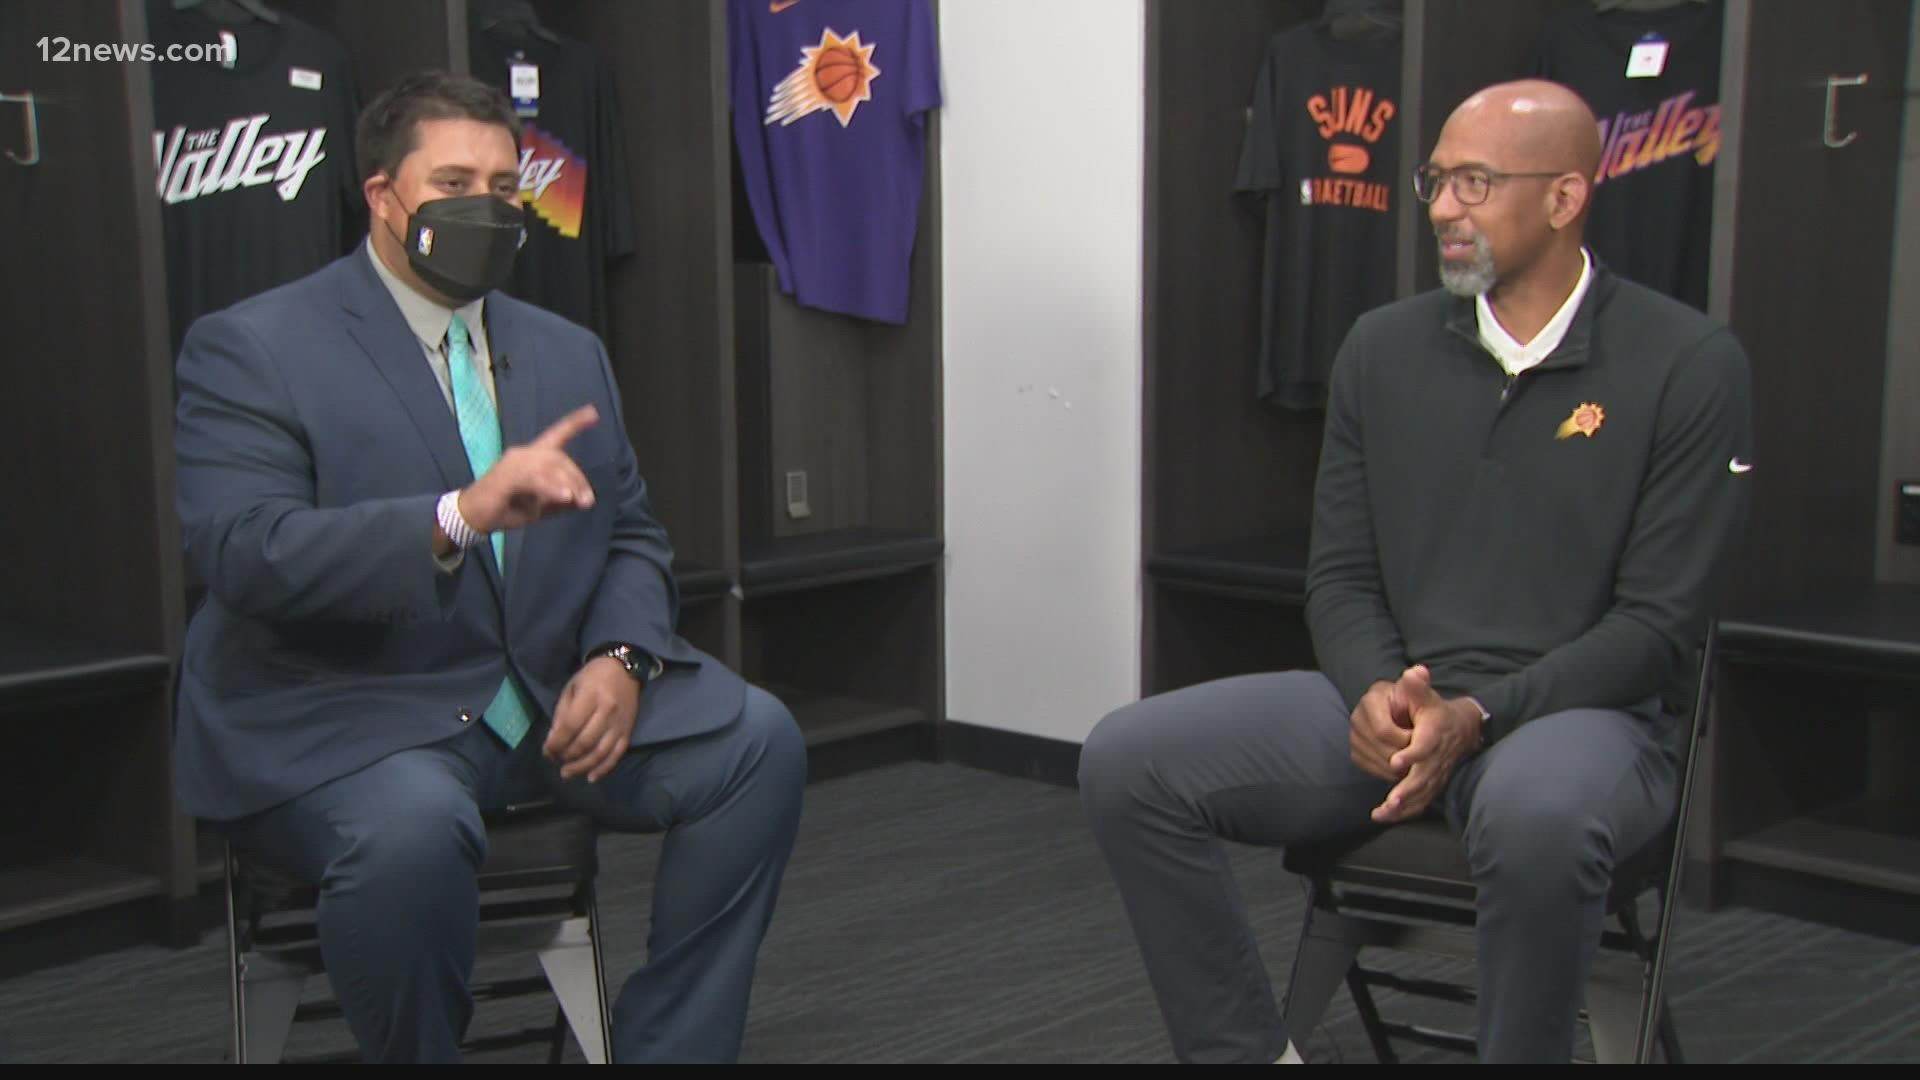 As the Suns enter training camp for the 2021-22 season, Team 12's Cameron Cox catches up with head coach Monty Williams